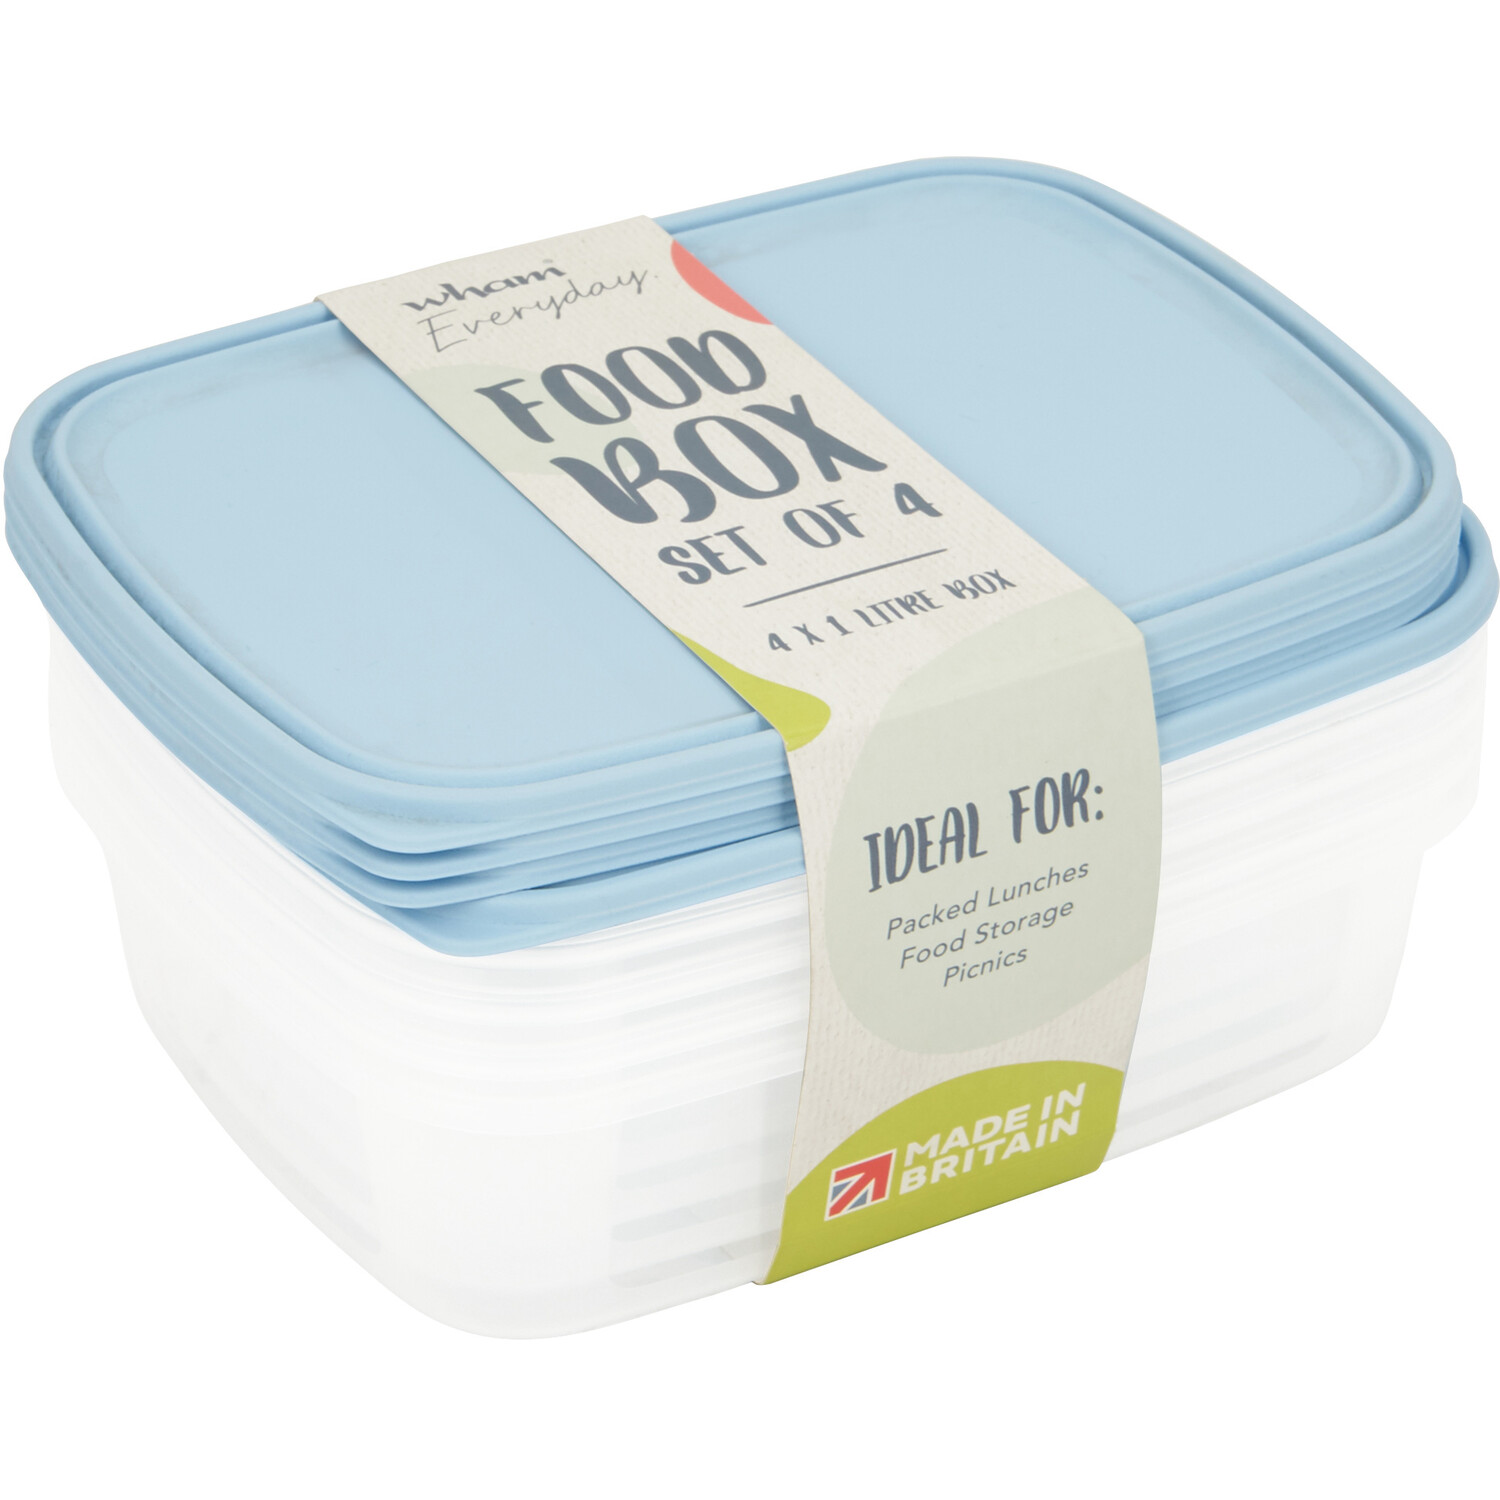 Set of 4 Everyday Food Boxes - Clear Image 1